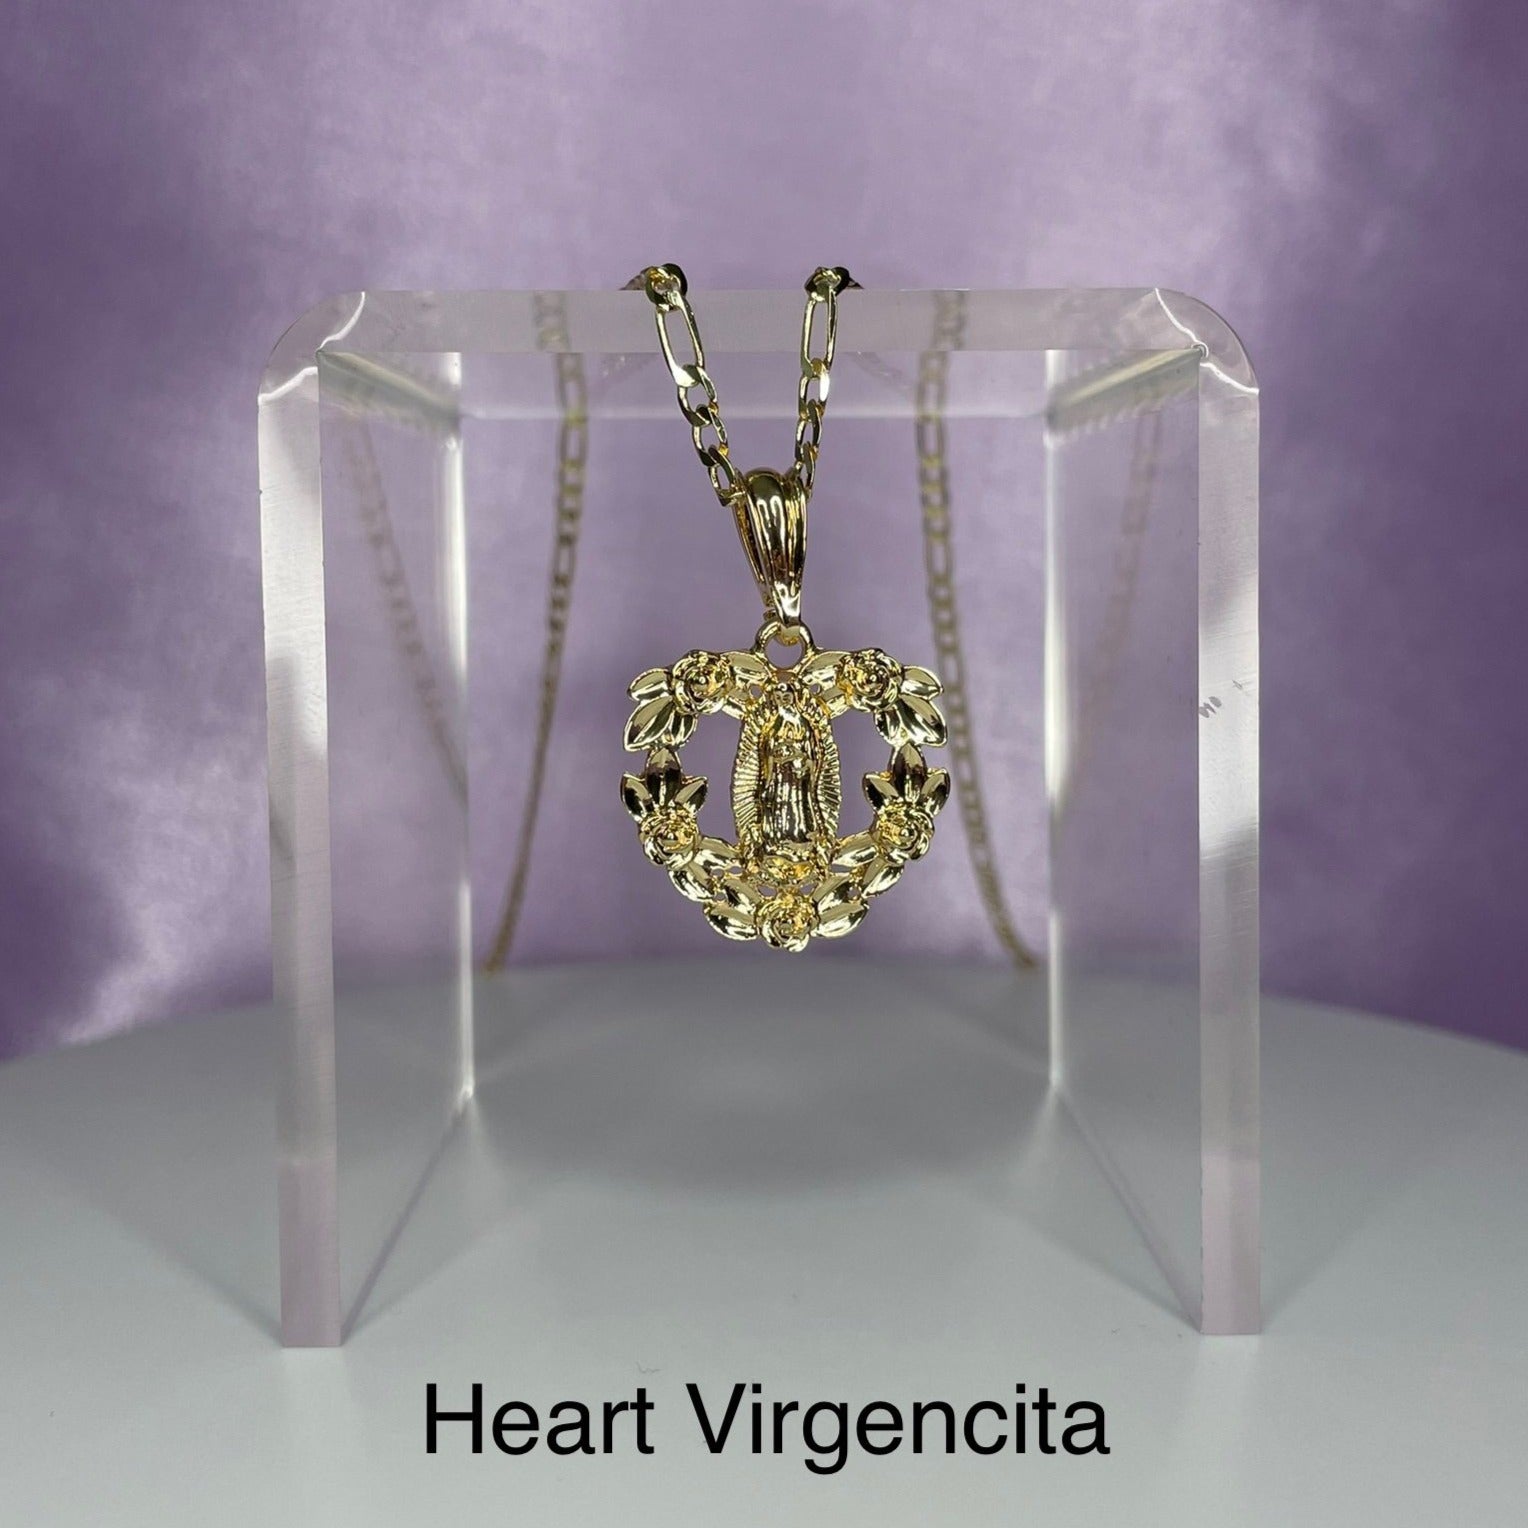 Heart virgencita pendant 14k gold plated on gold plated cute necklace. Virgen mary jewelry. Virgen maria jewelry. Joyas virgencita. Virgencita. Virgencita pendant.